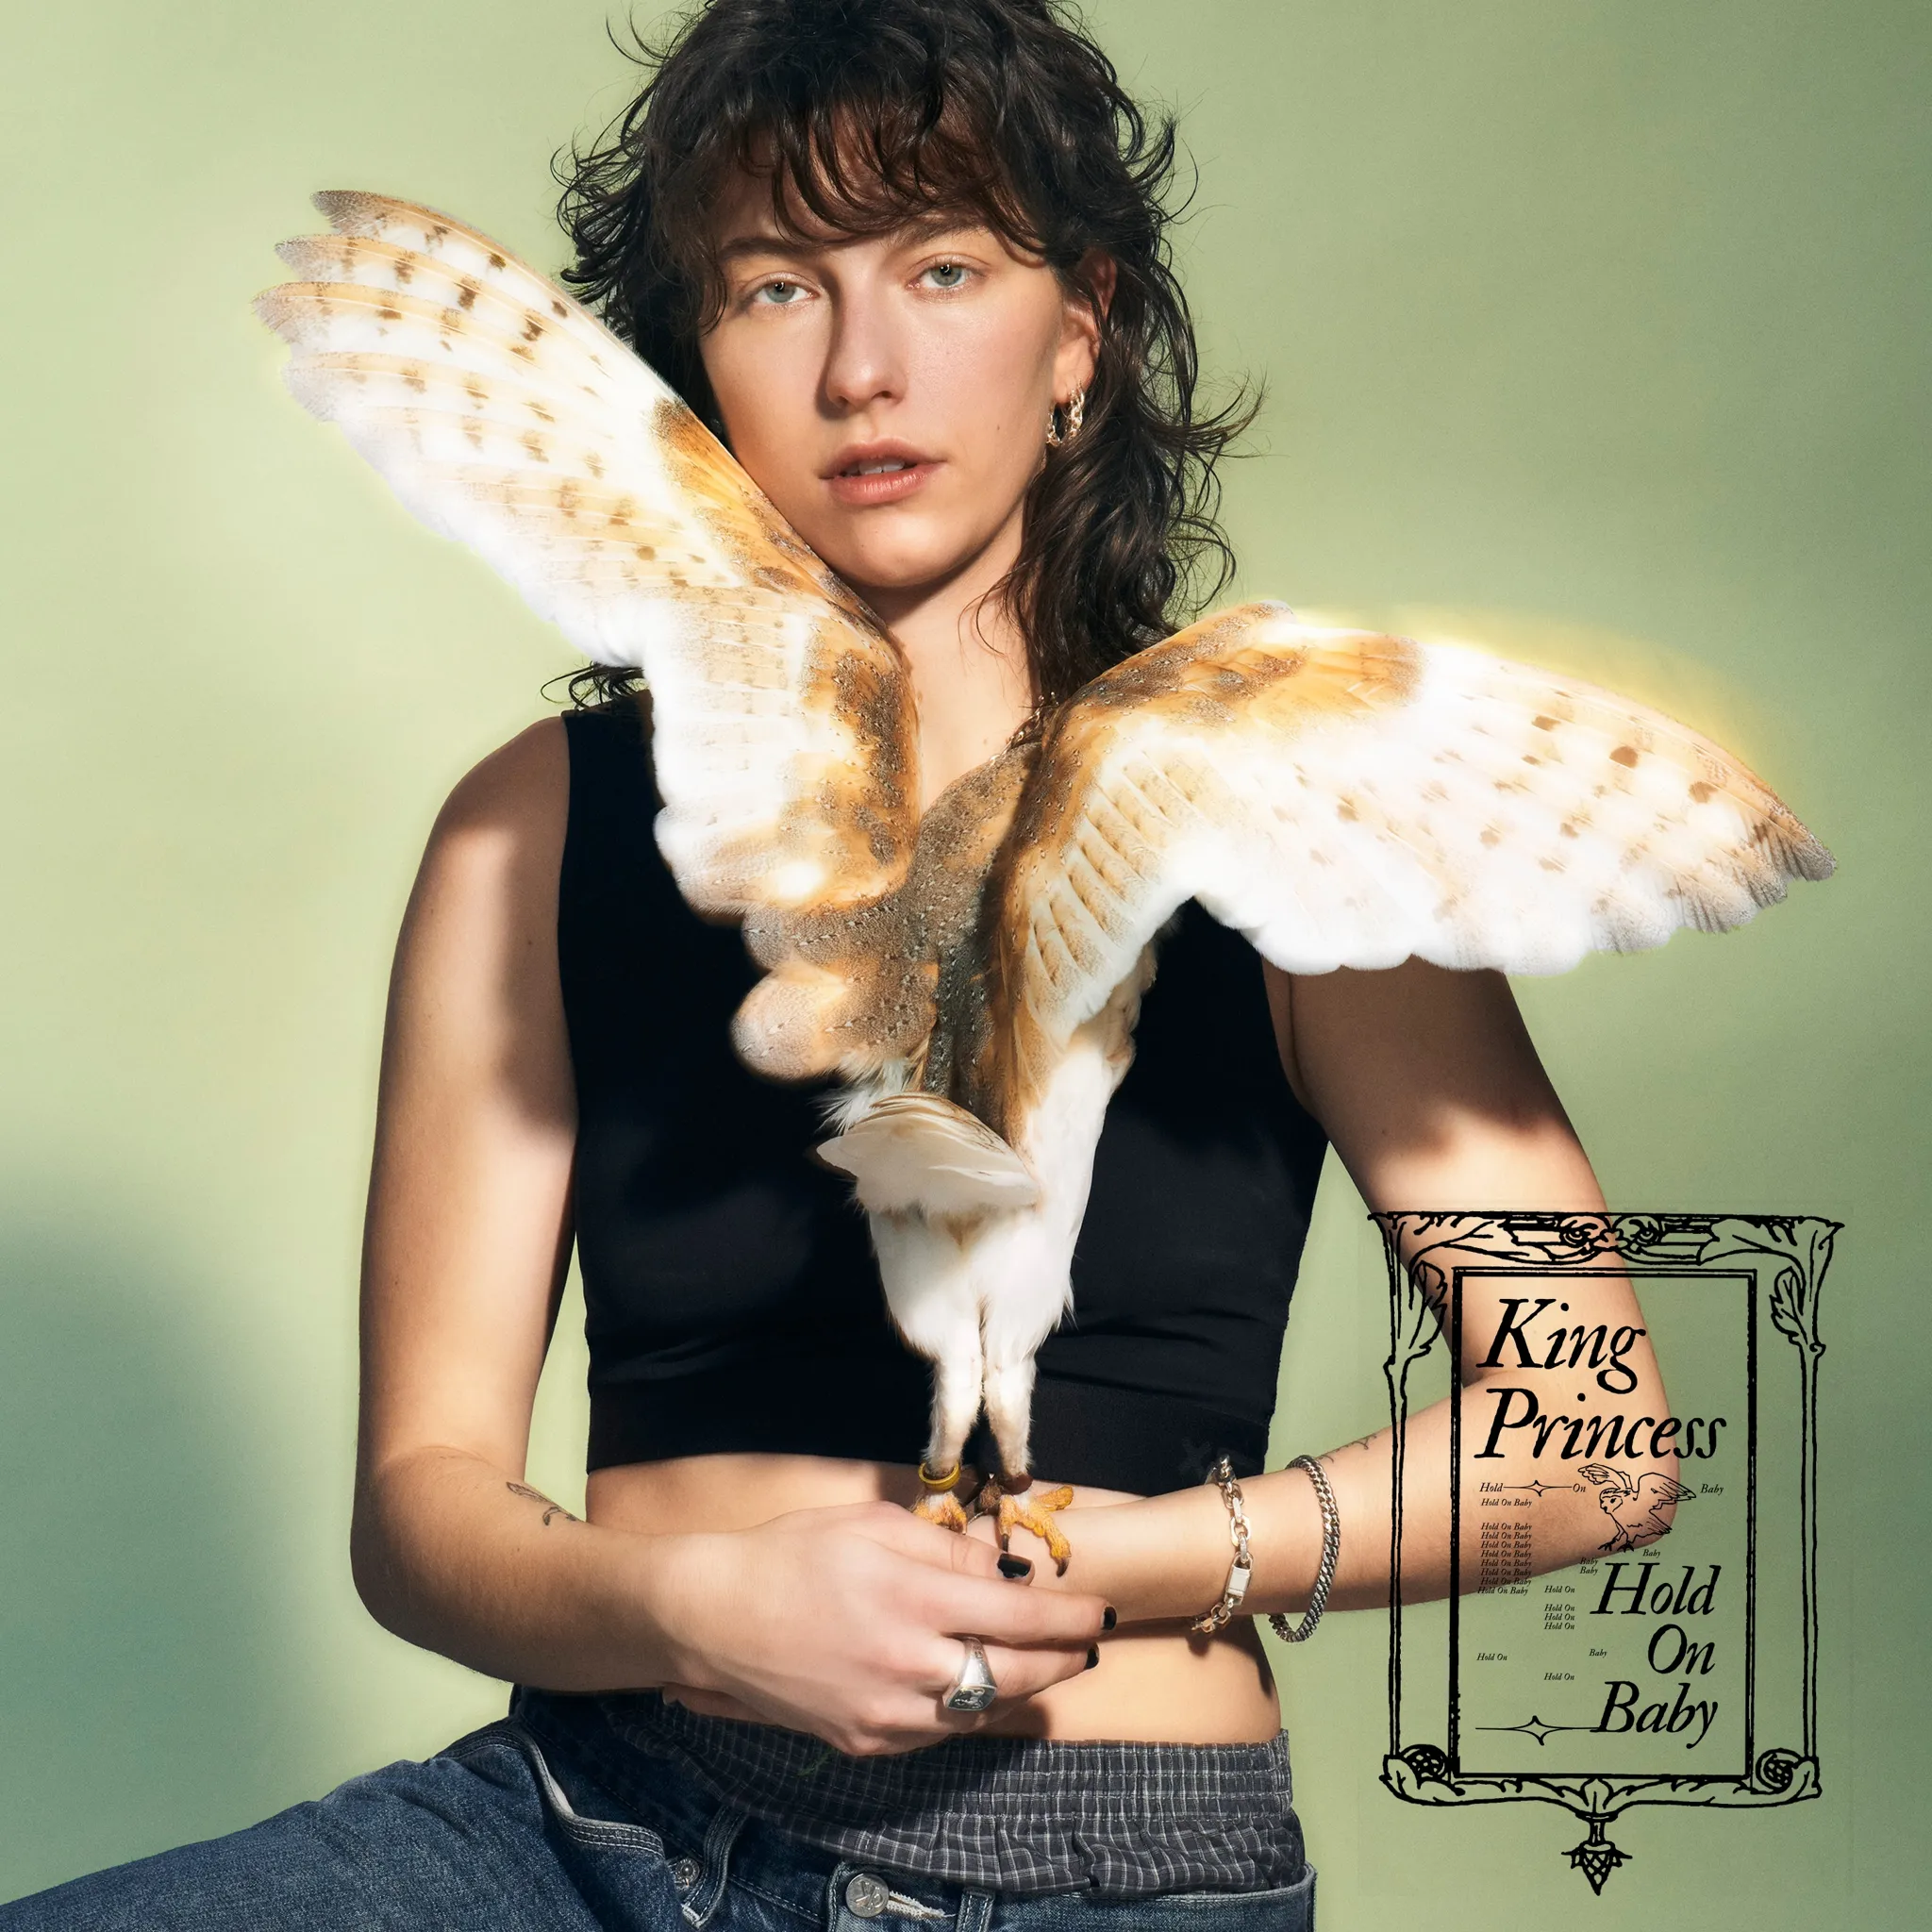 <strong>King Princess - Hold on Baby</strong> (Vinyl LP - white)